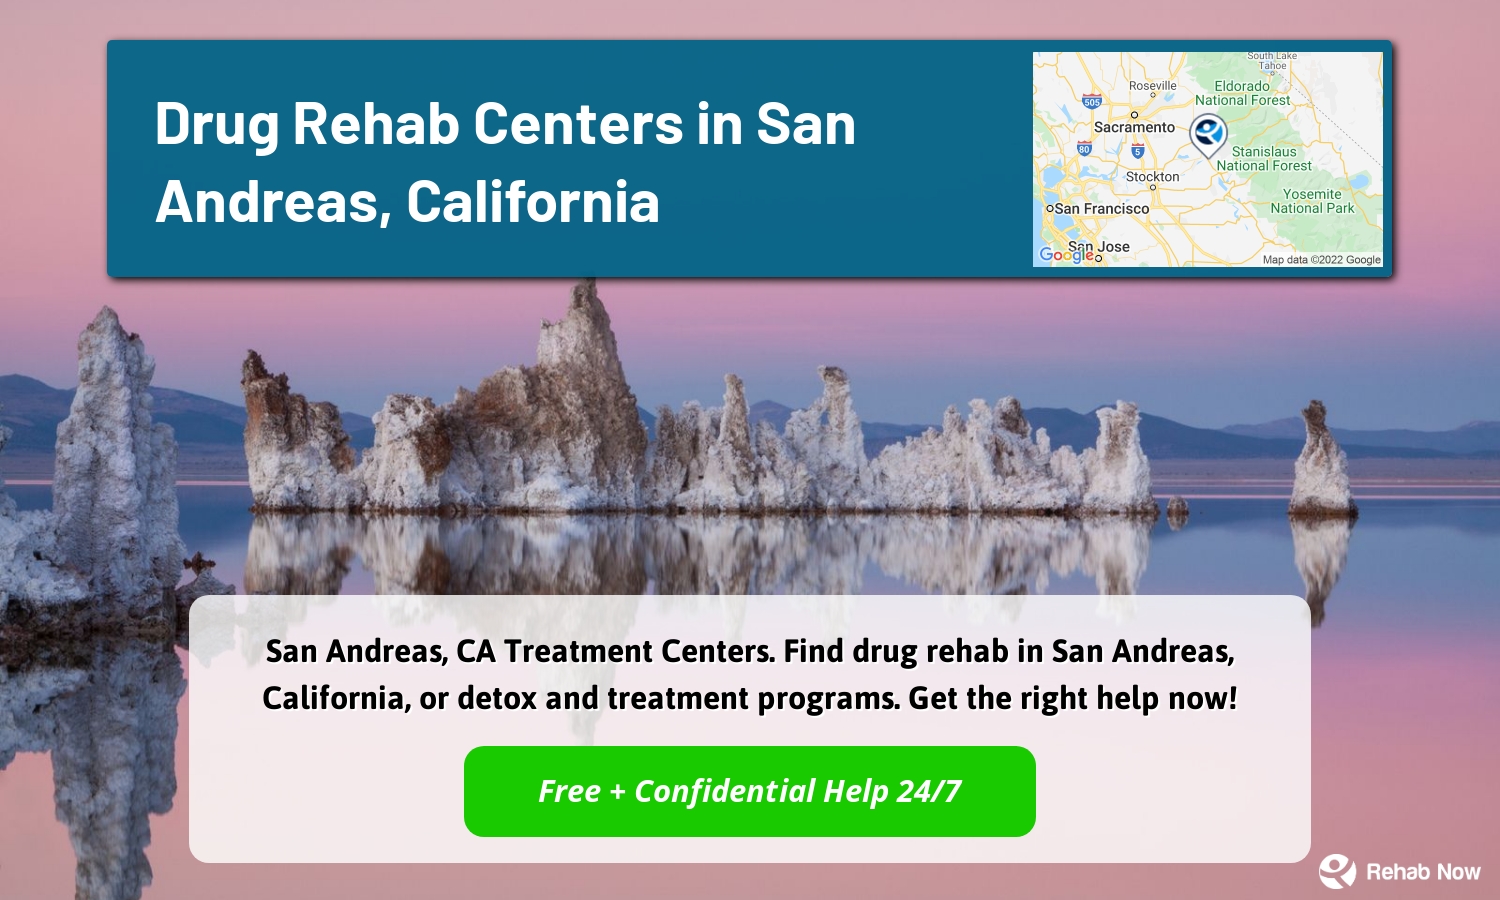 San Andreas, CA Treatment Centers. Find drug rehab in San Andreas, California, or detox and treatment programs. Get the right help now!